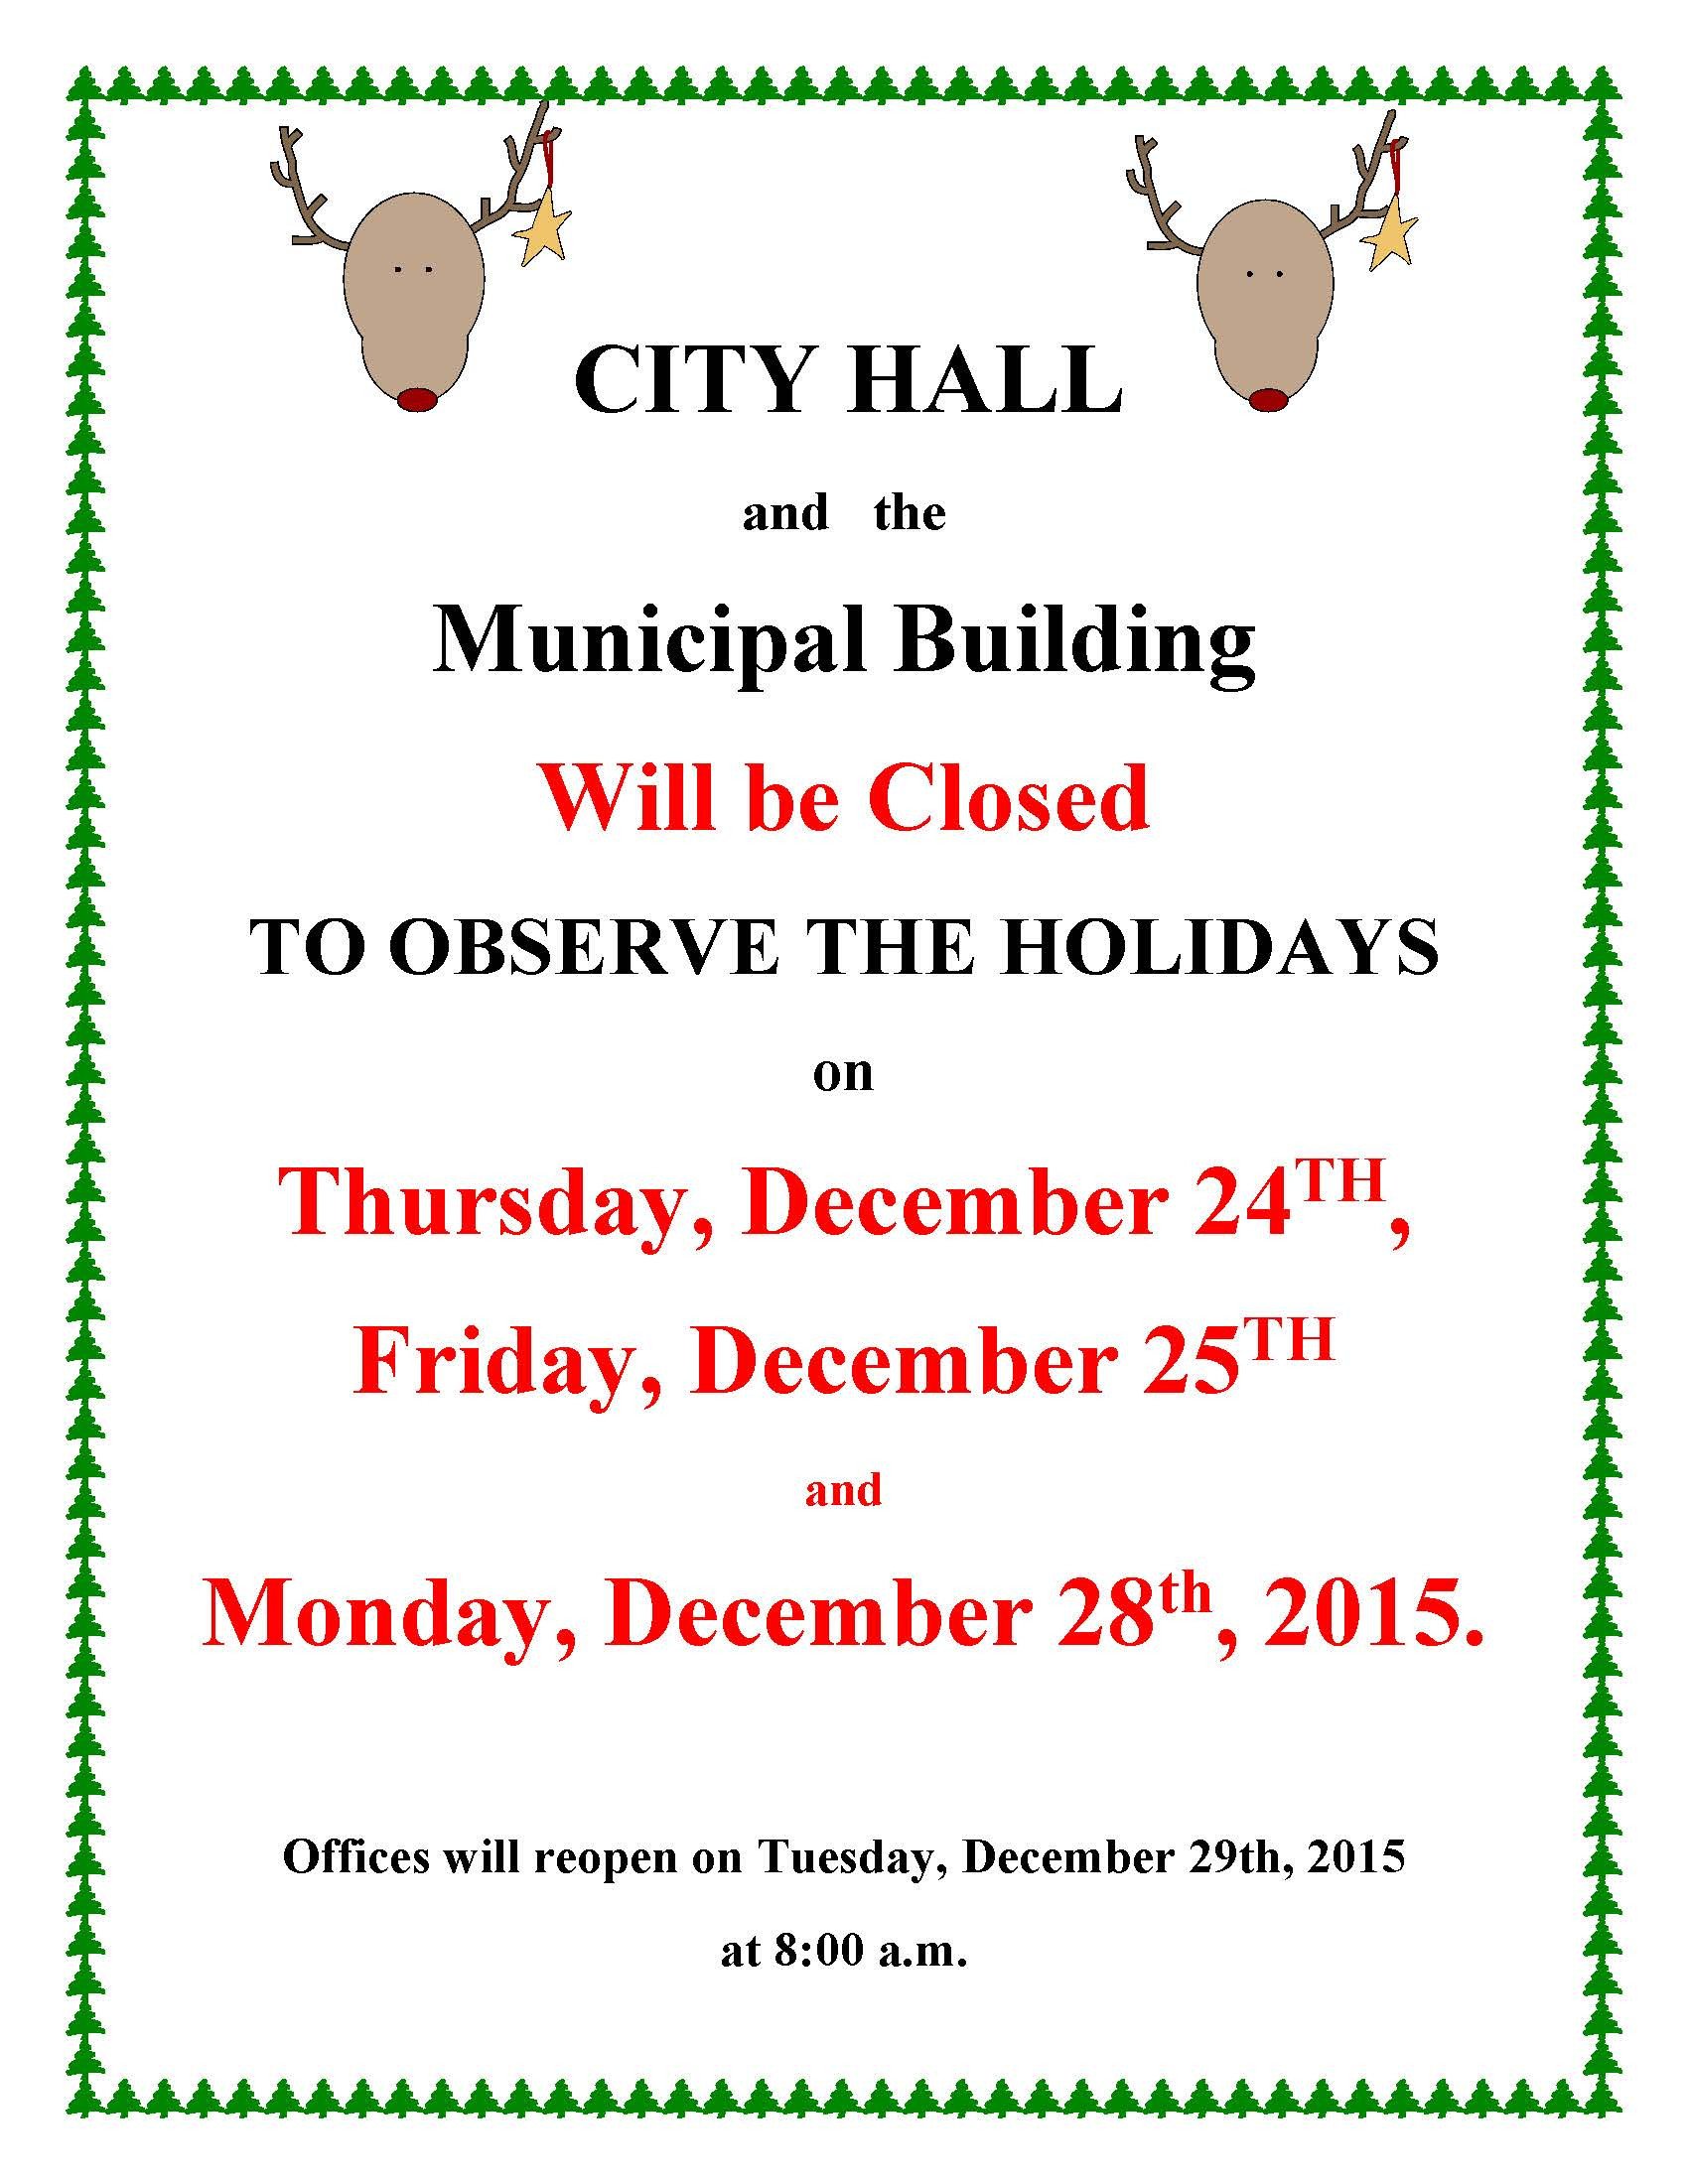 City fices Closed for Holidays